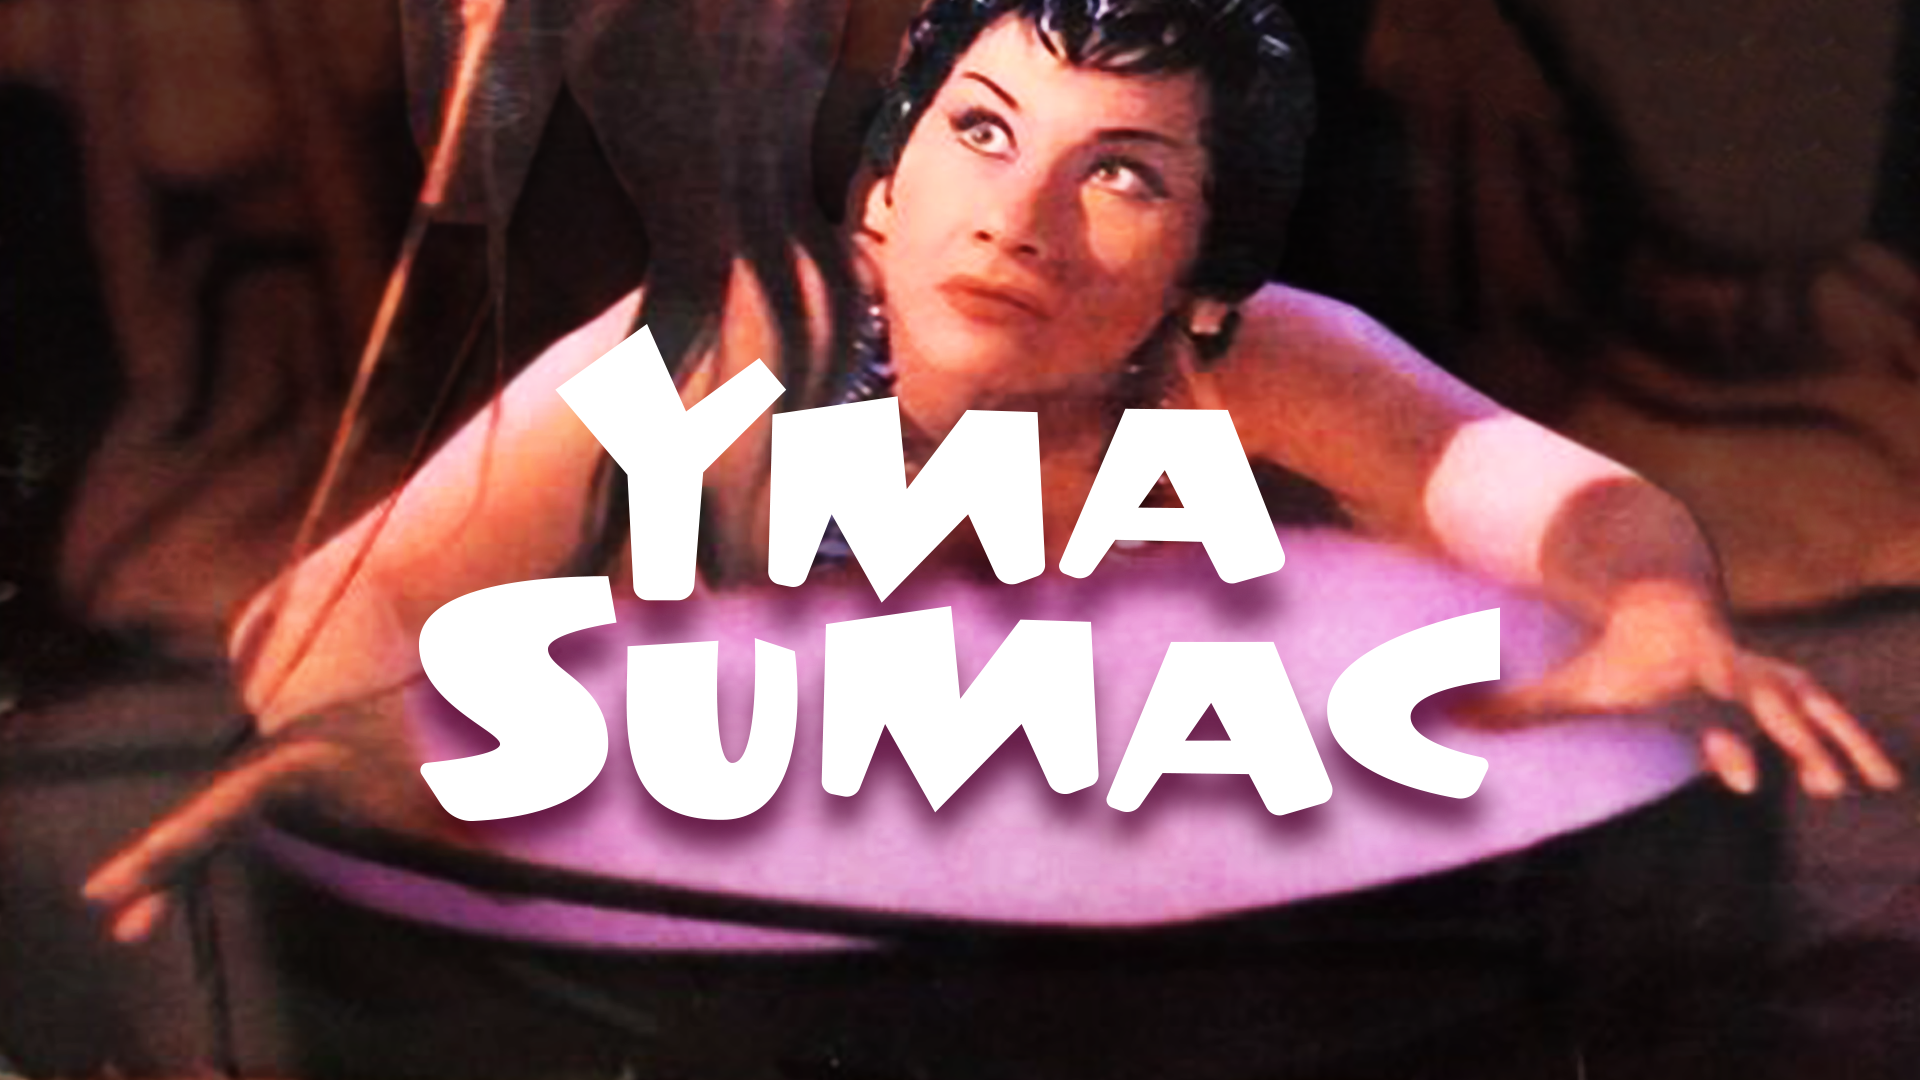 Buy and download Yma Sumac cool fonts